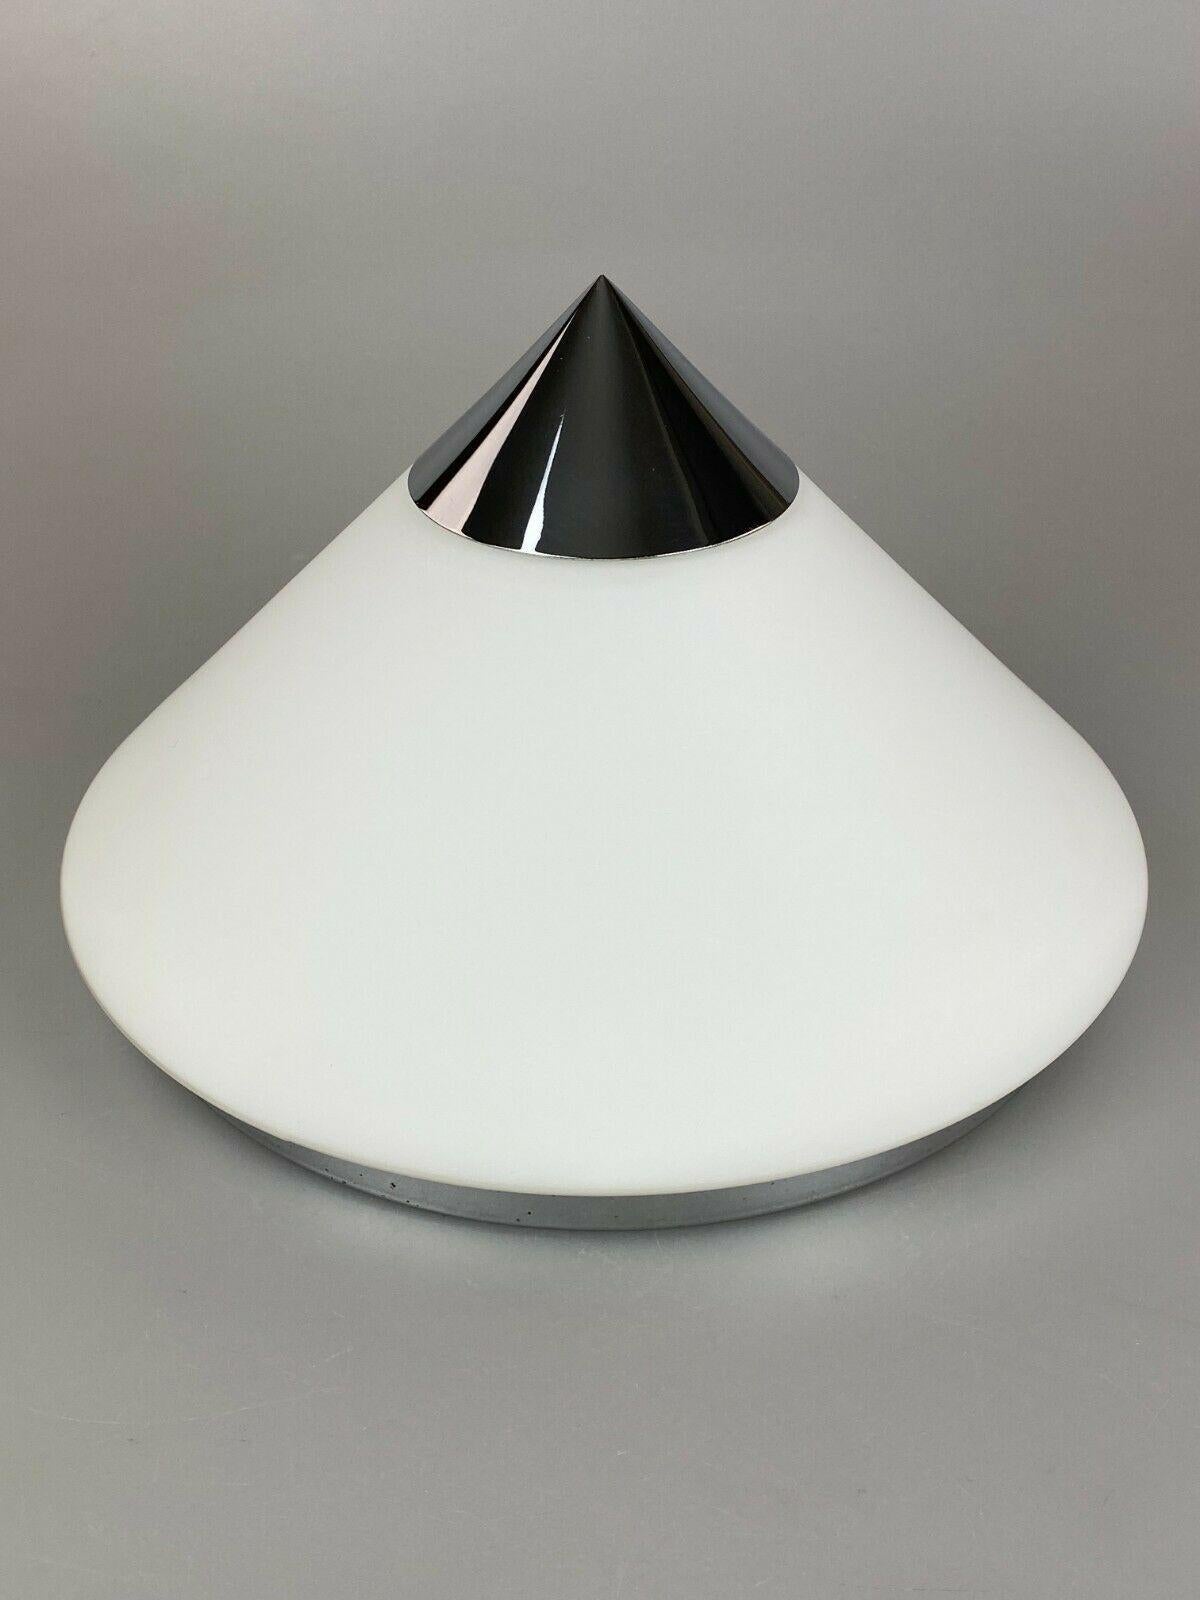 60s 70s Lamp light wall lamp Limburg Plafoniere Space Age Design 60s

Object: wall lamp

Manufacturer: Glashütte Limburg

Condition: good

Age: around 1960-1970

Dimensions:

Diameter = 30cm
Height = 18cm

Other notes:

The pictures serve as part of